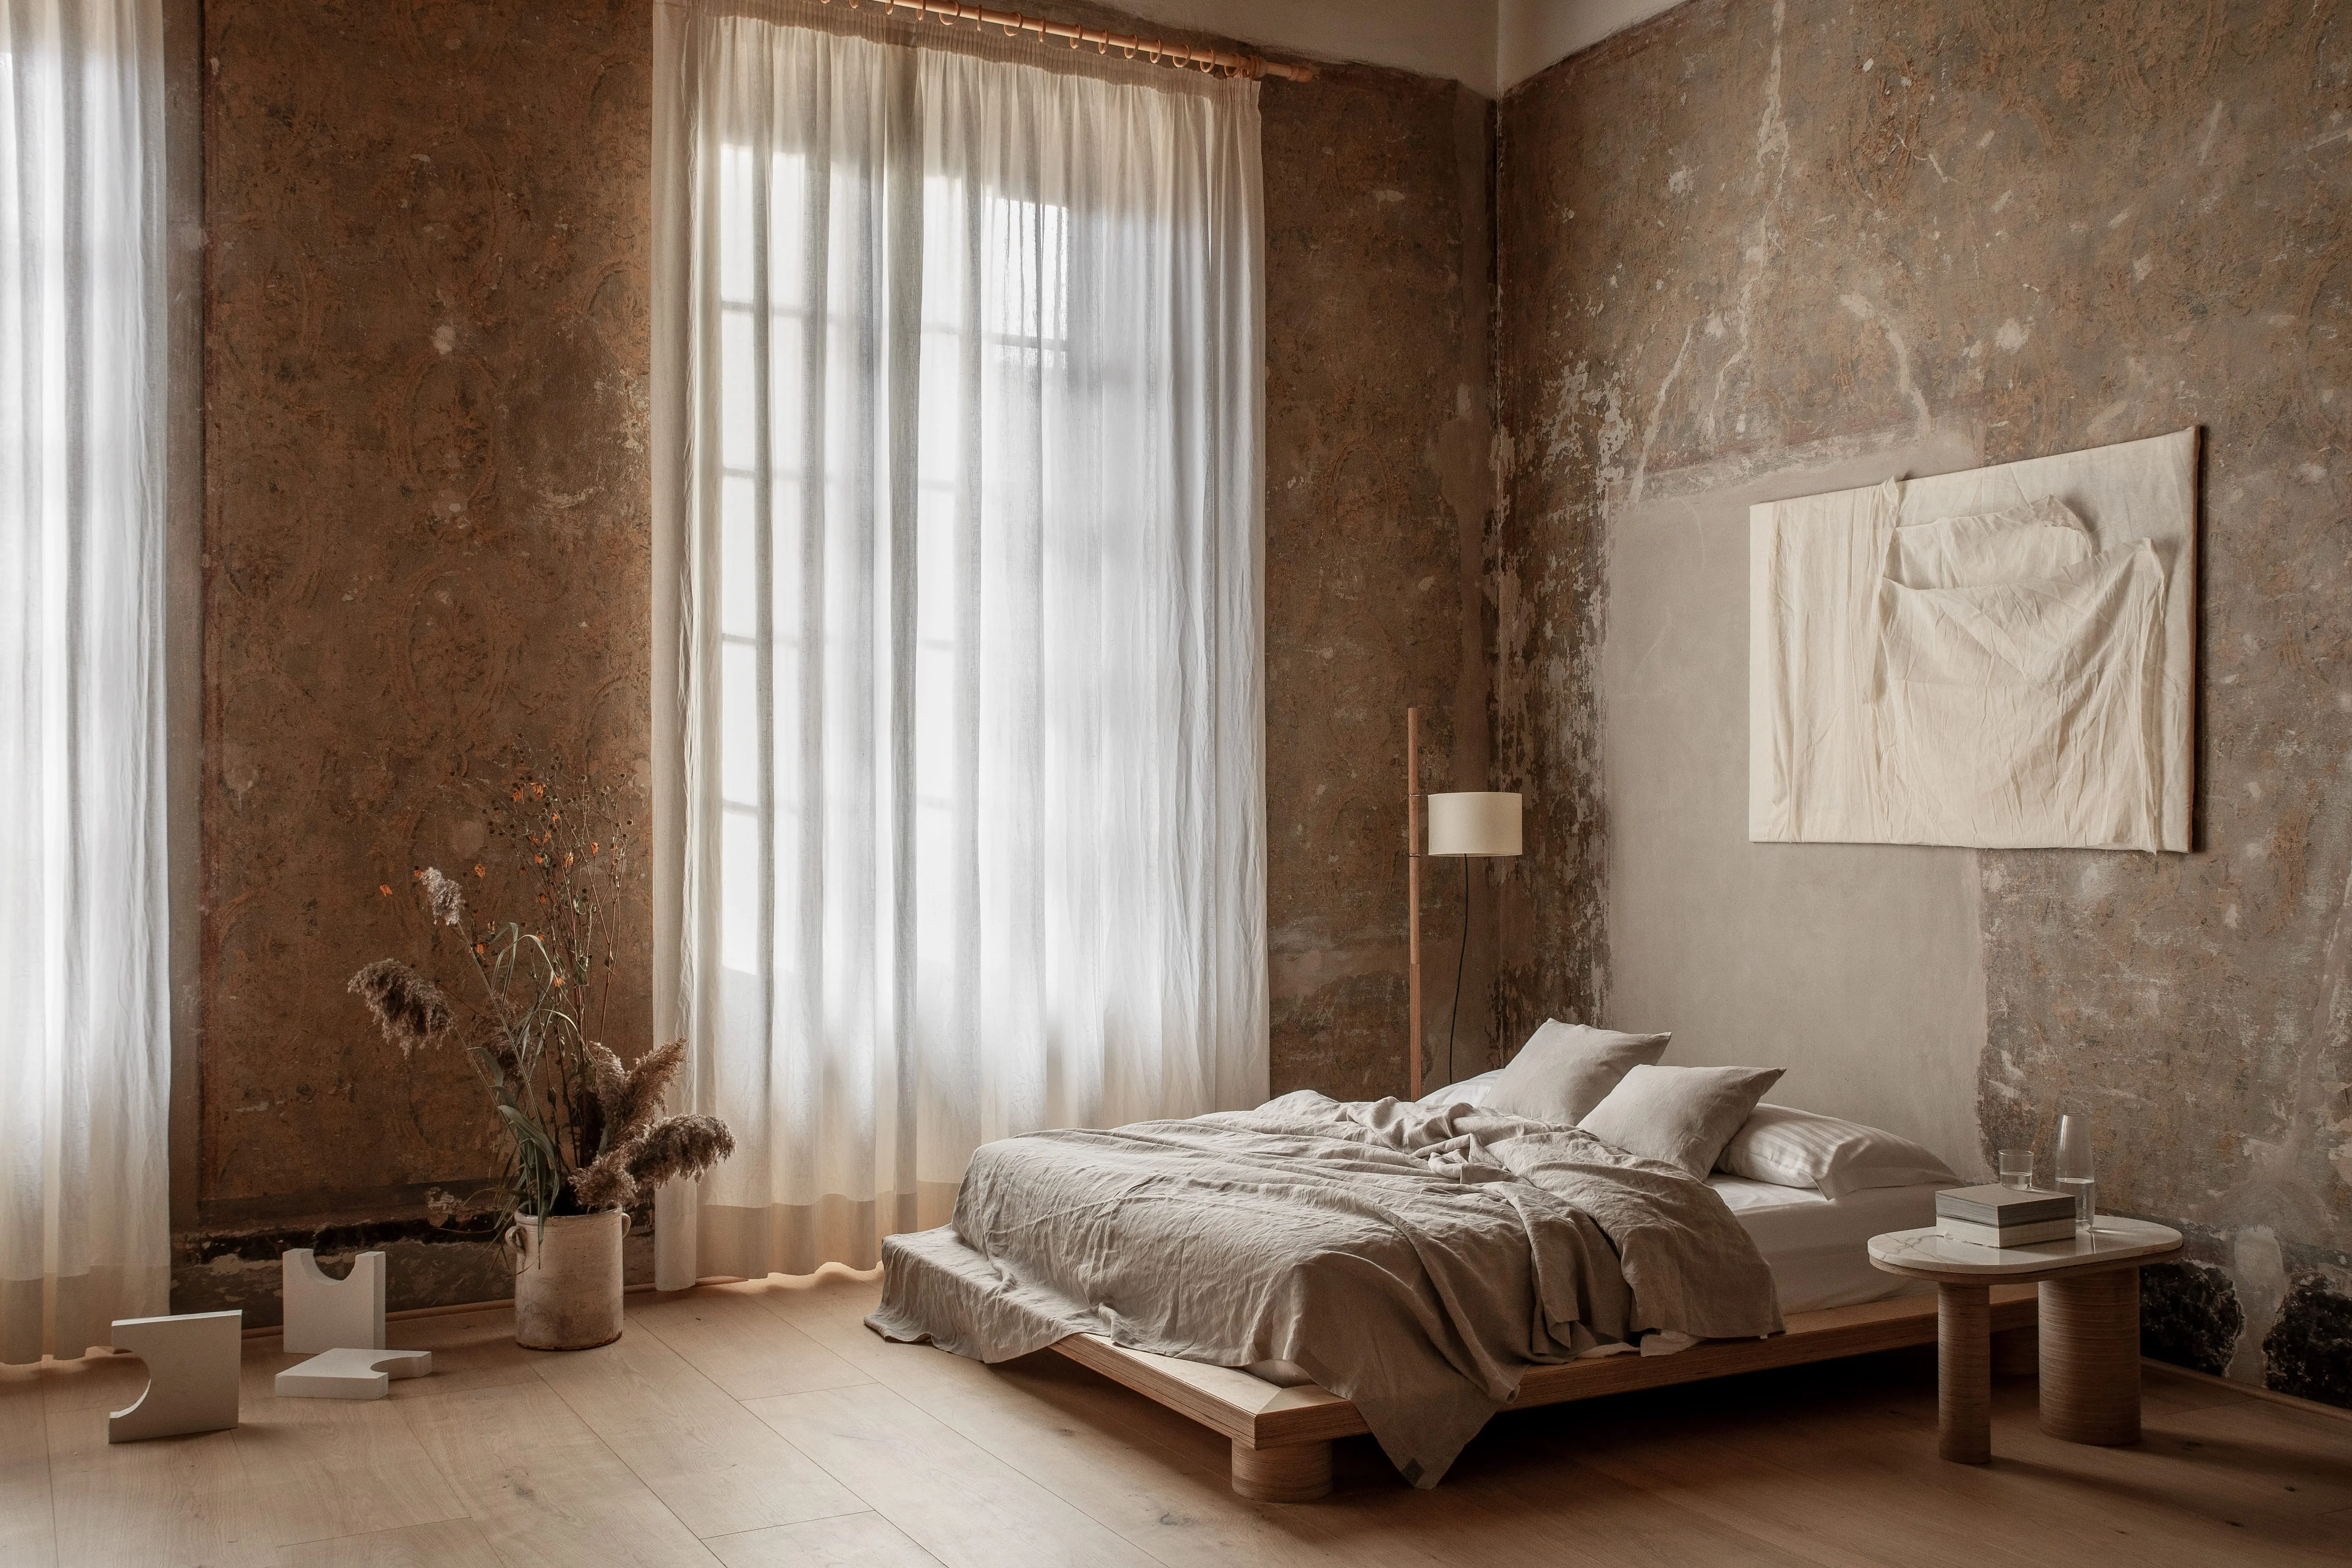 Nest Italy - Top Floor Suites in a Design Residency in Florence 